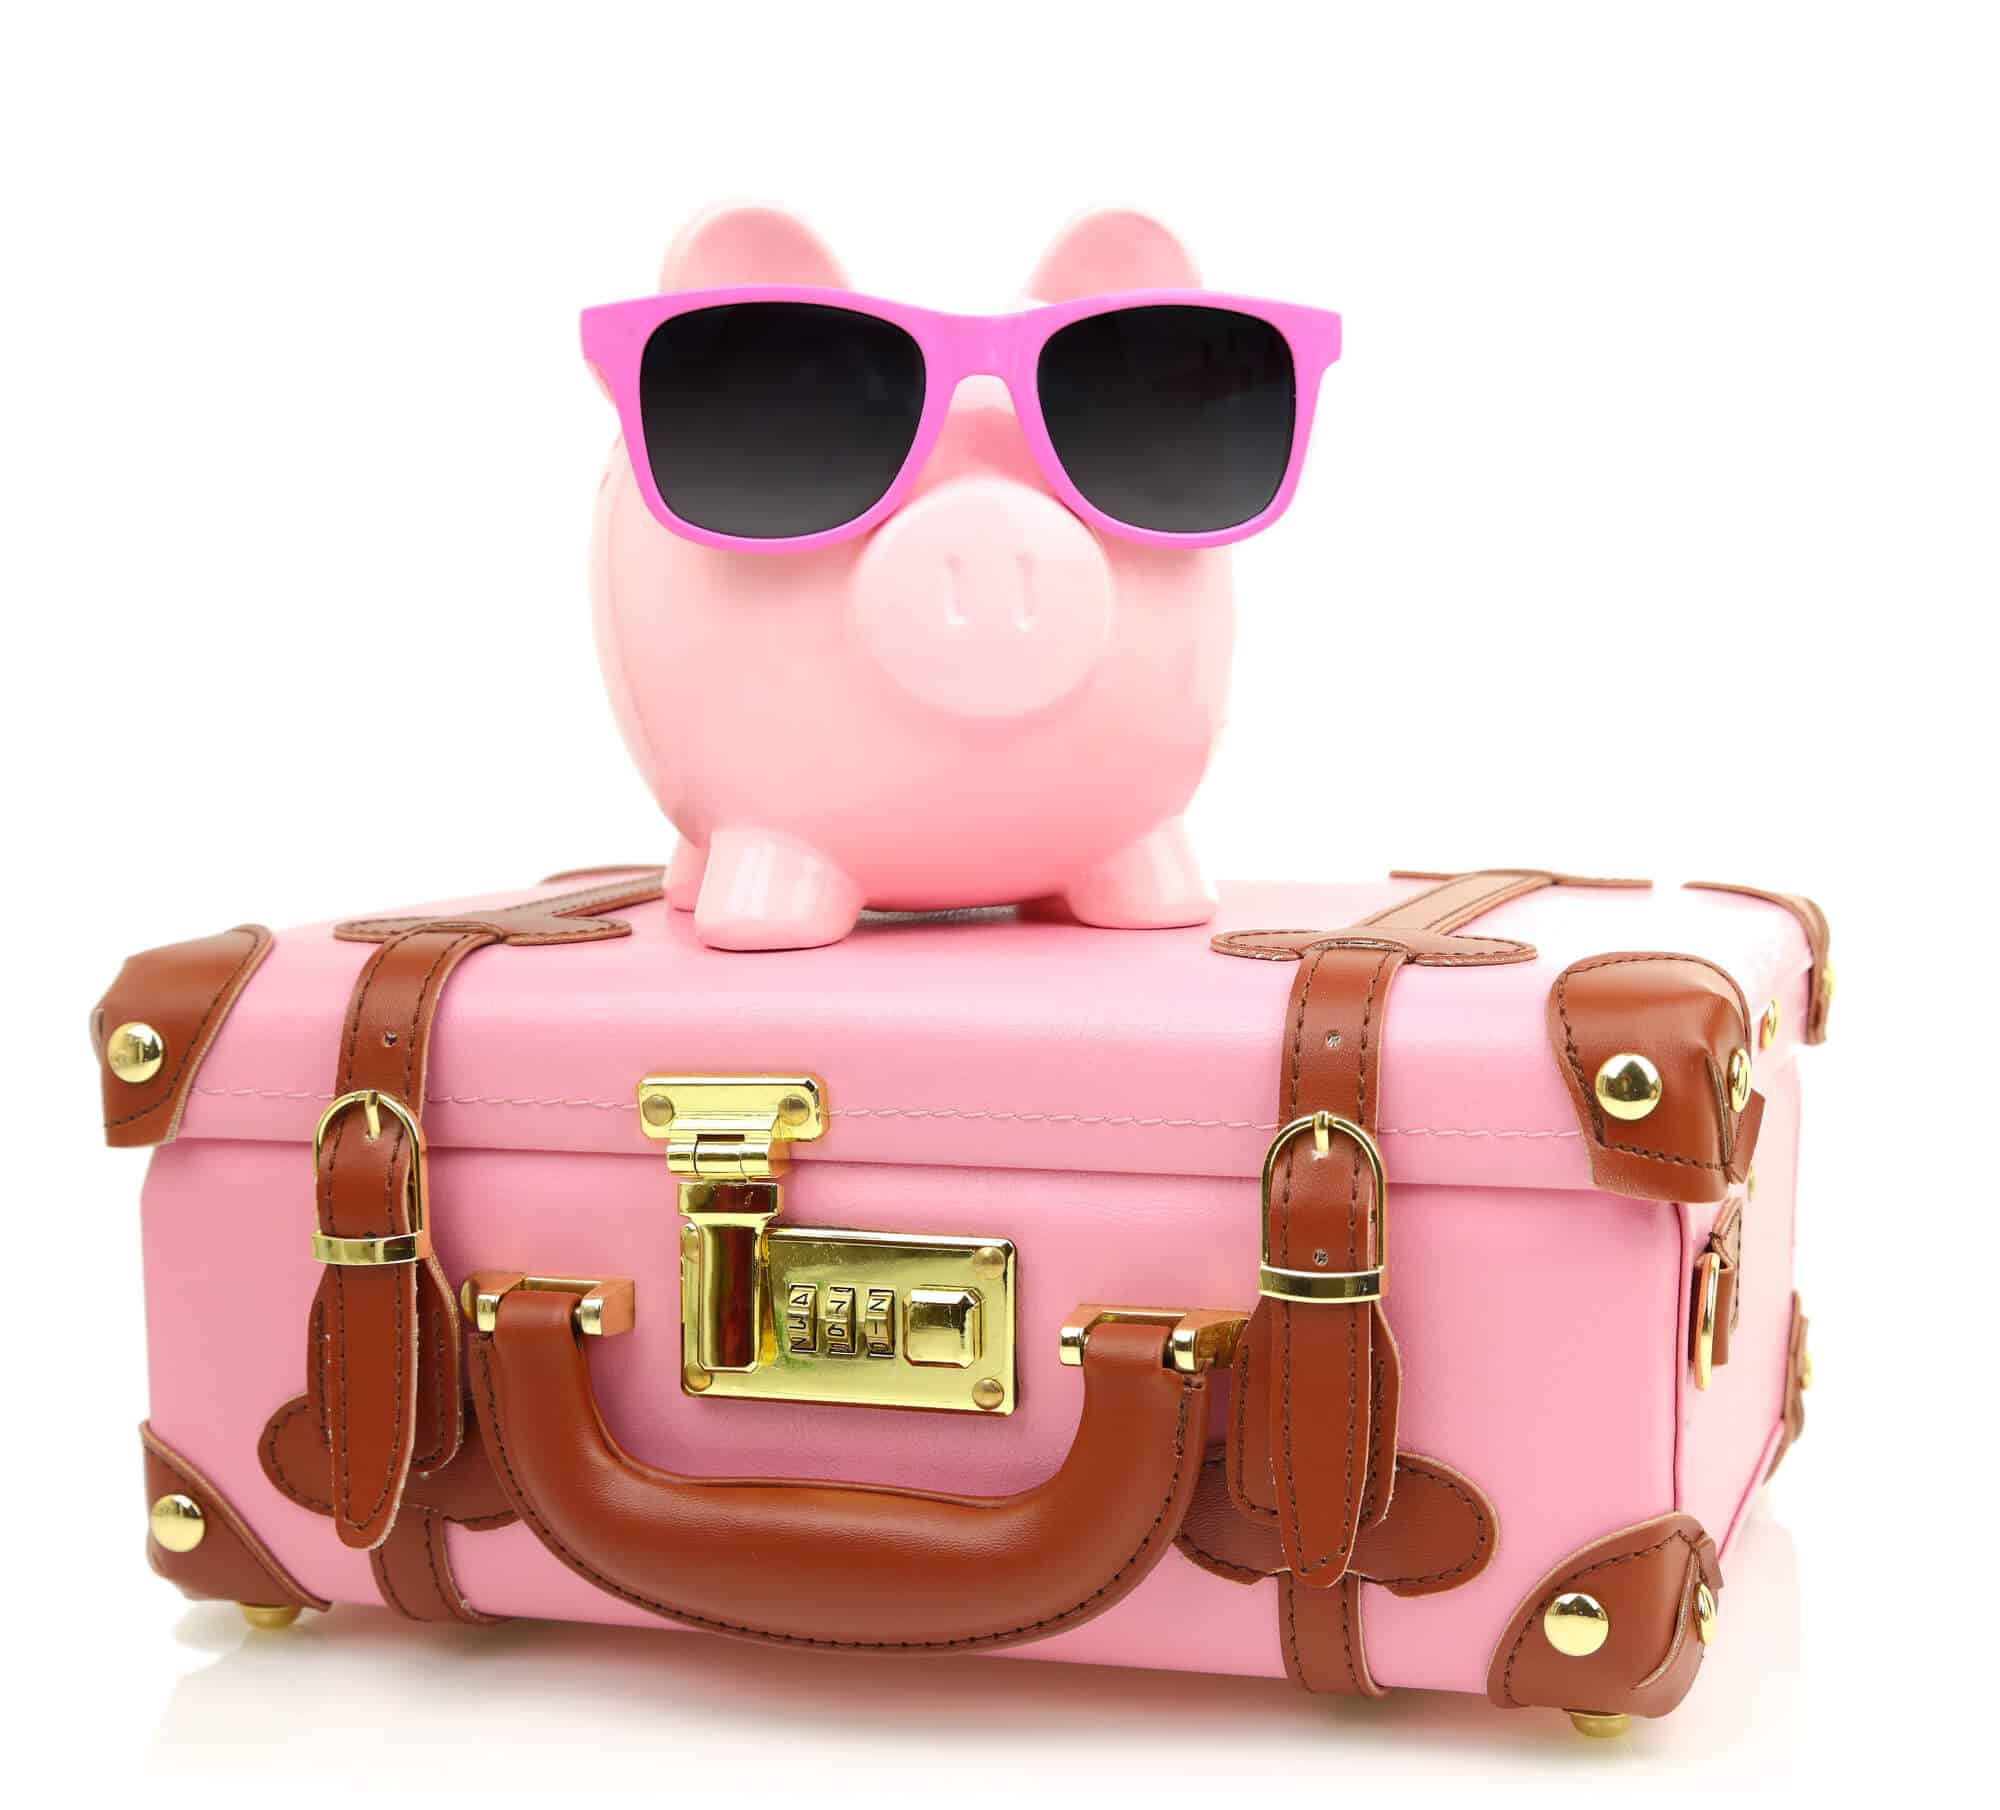 Creative Cartoon Piggy Bank, Unbreakable Plastic Cute Pink Pigs Money Bank  Box, Coin Banks for Girls and Boys,Best Gifts for Birthday, Christmas for  Home Decor 